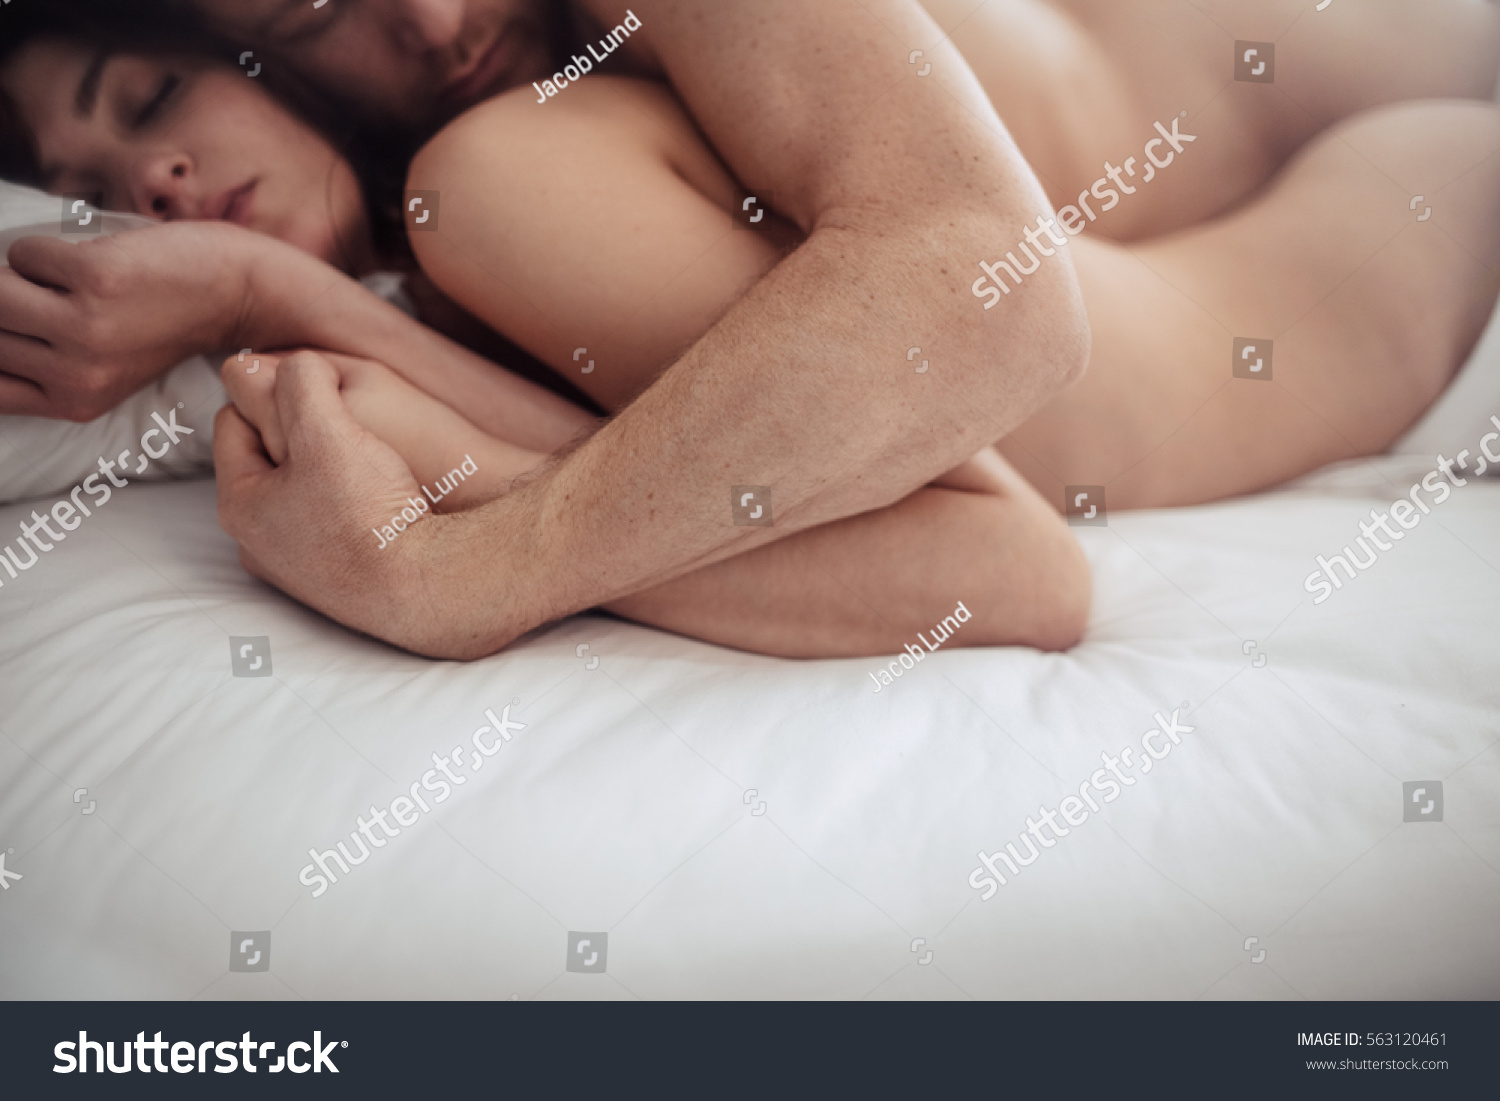 Pictures of woman having sex